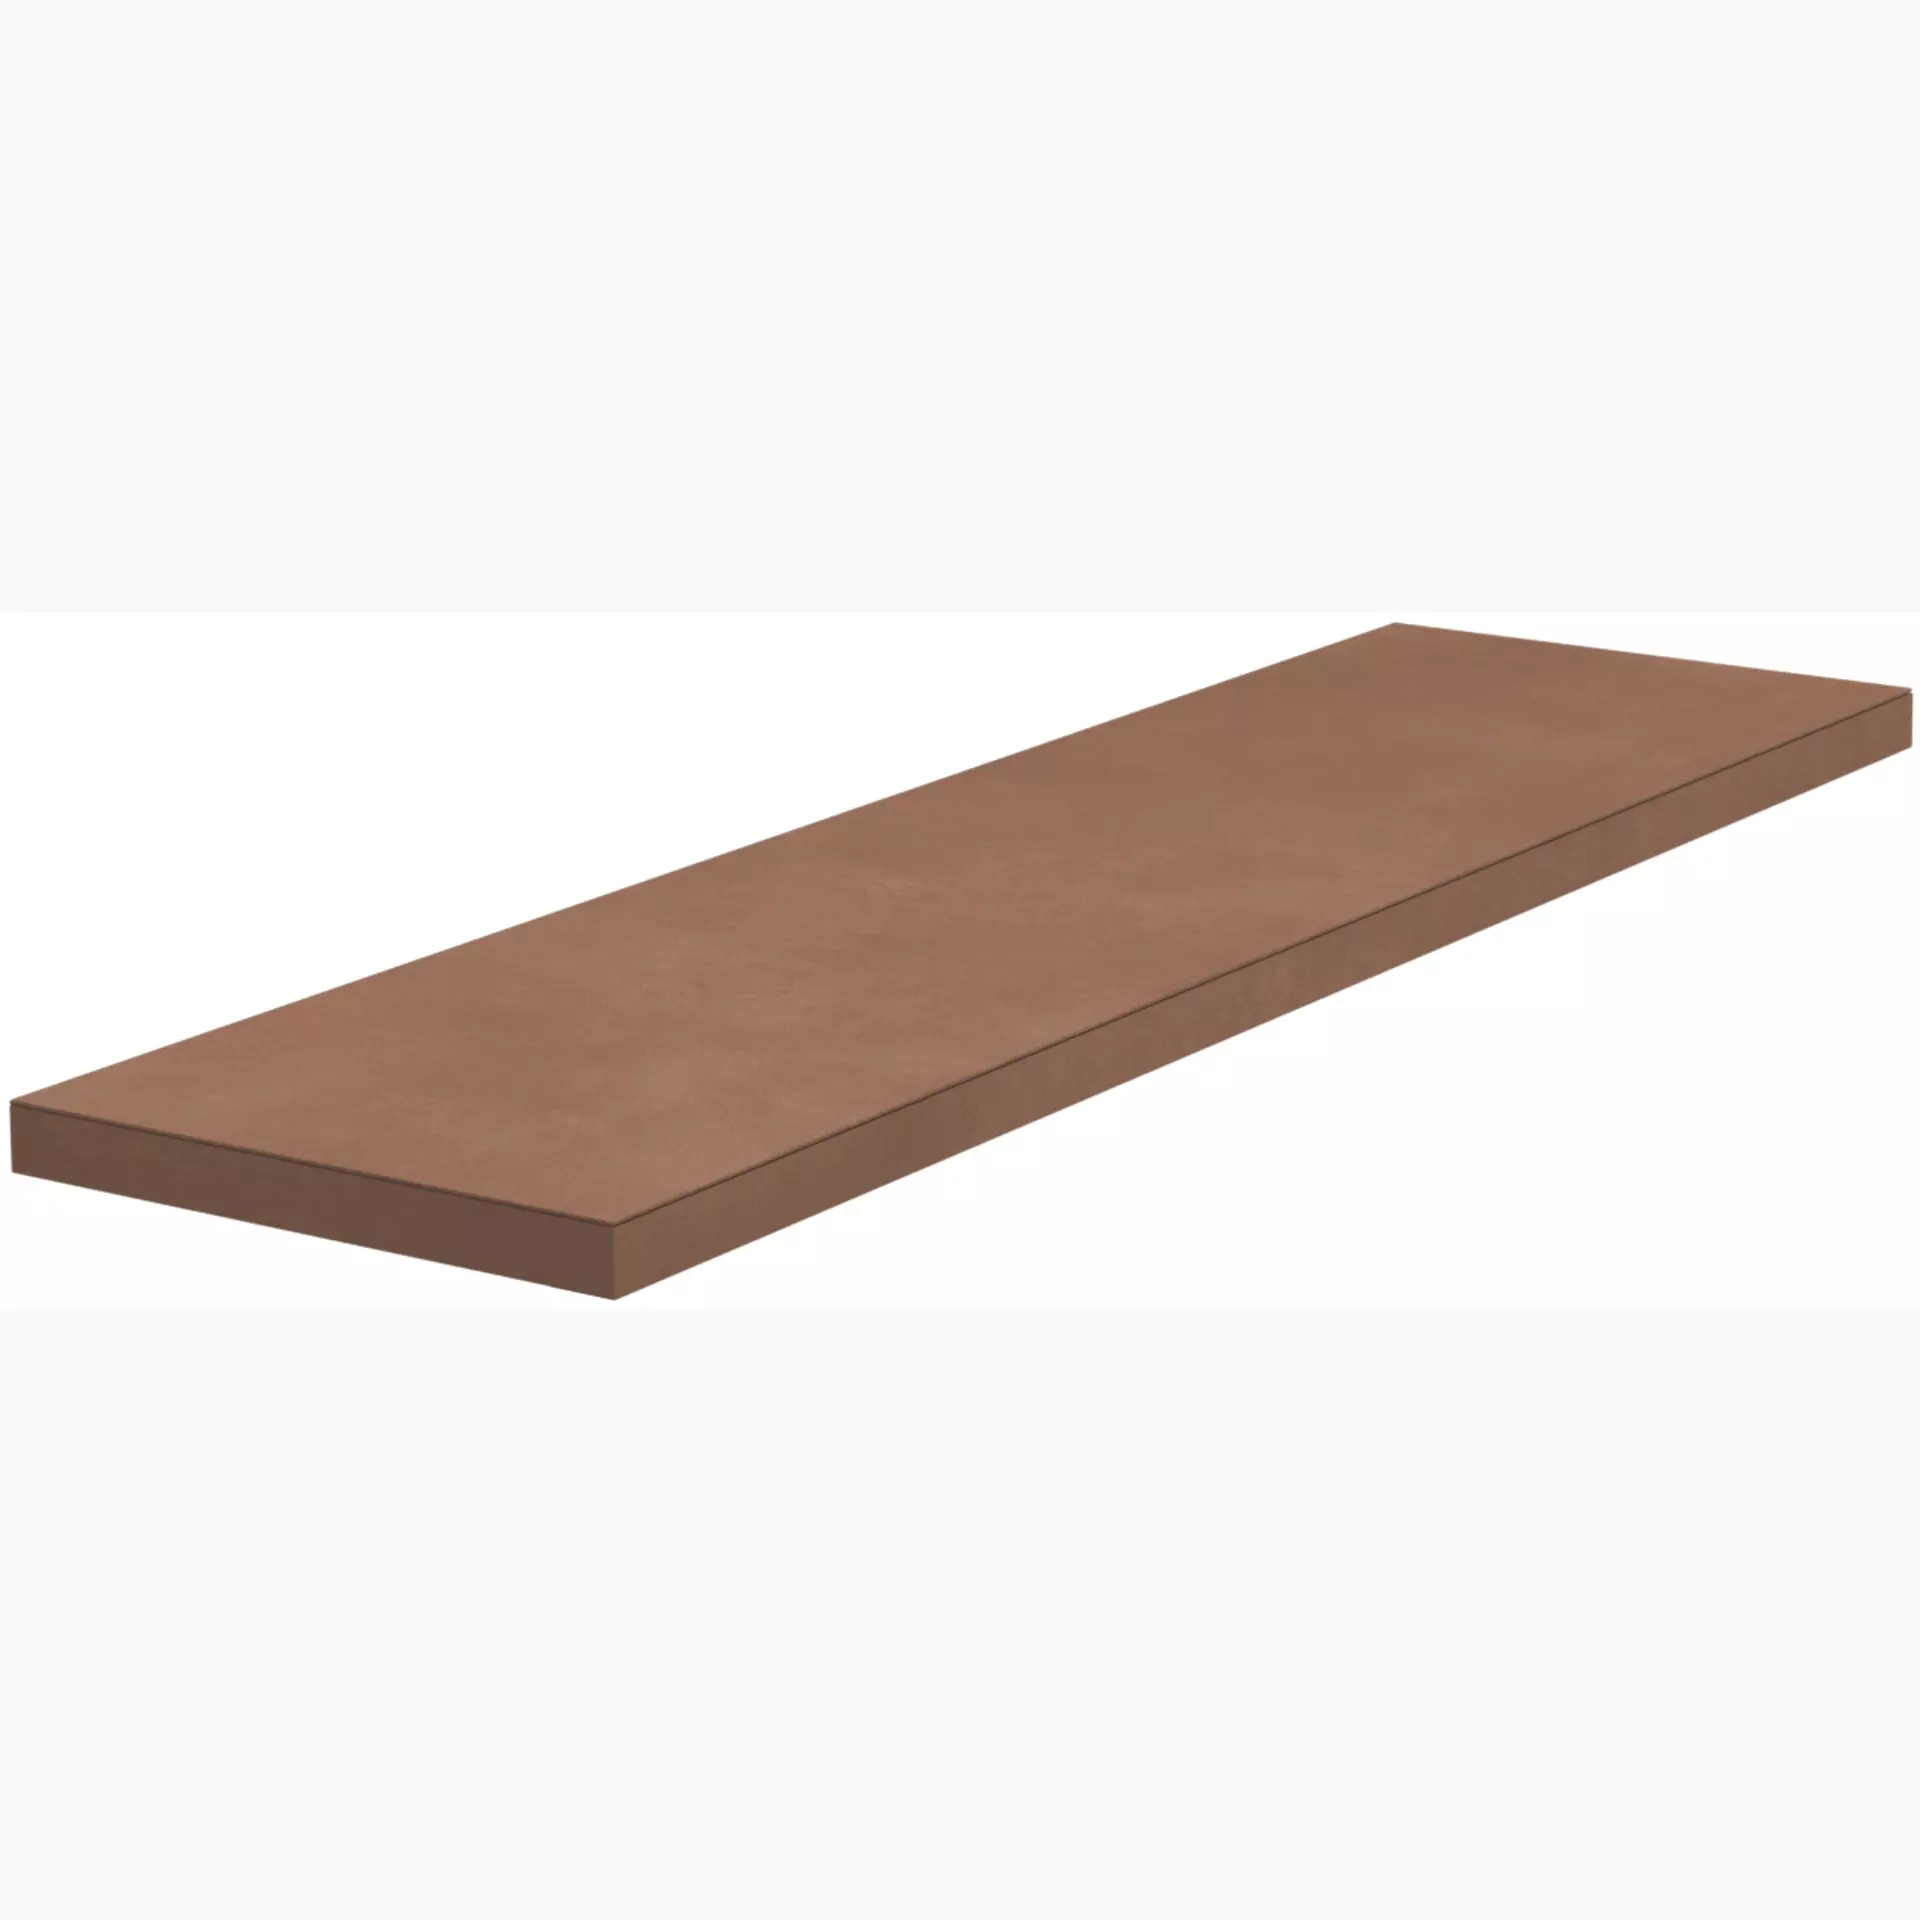 Del Conca Htl Timeline Canyon Htl06 Naturale Corner plate Step Left G3TL06RGS12 33x120cm rectified 8,5mm